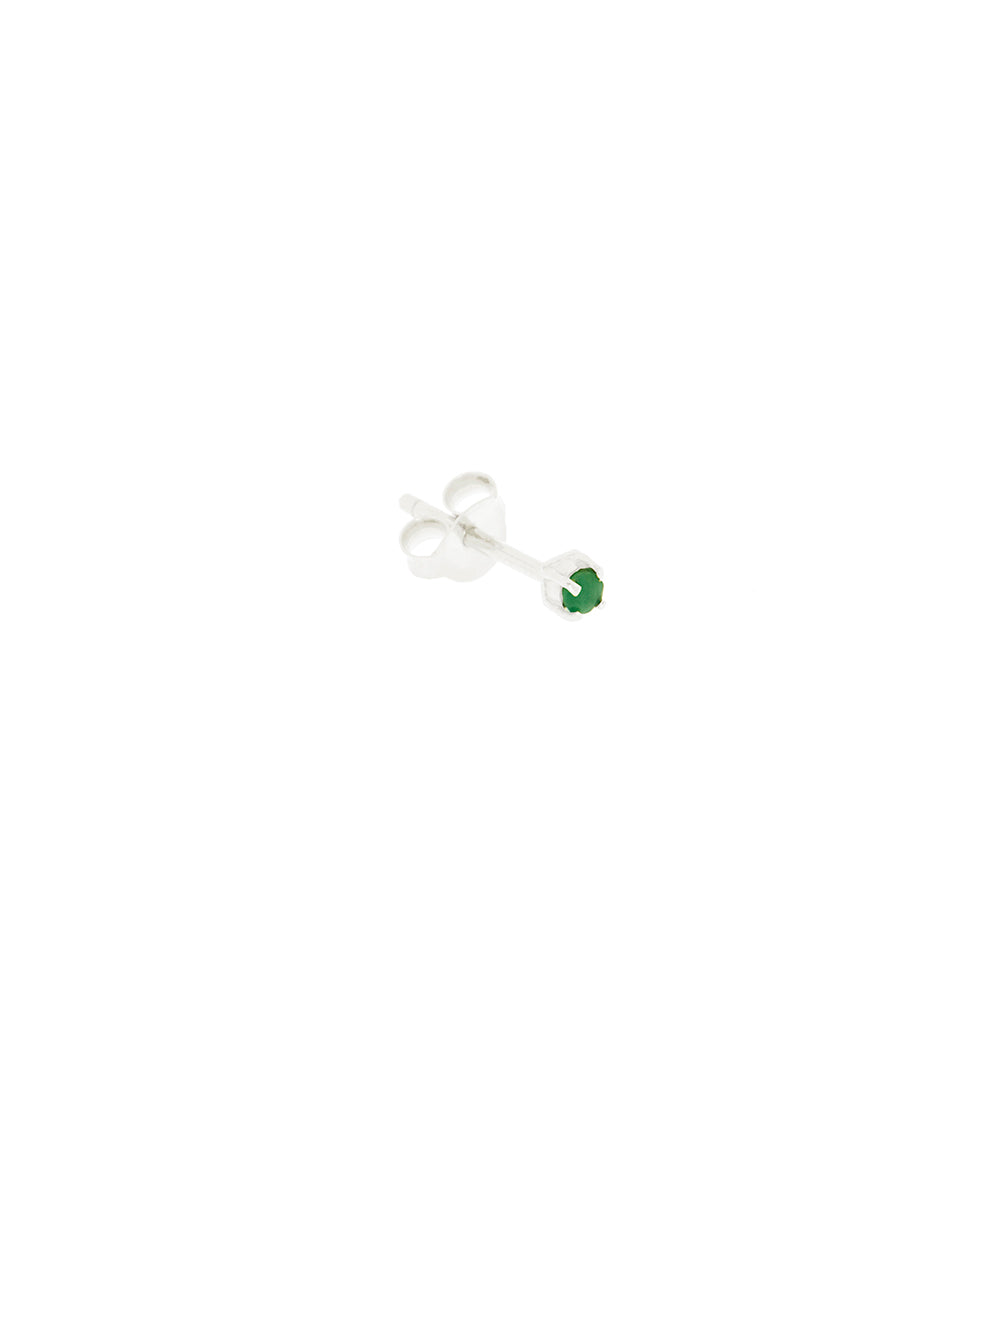 Everyday - Green Onyx | 925 Sterling Silver